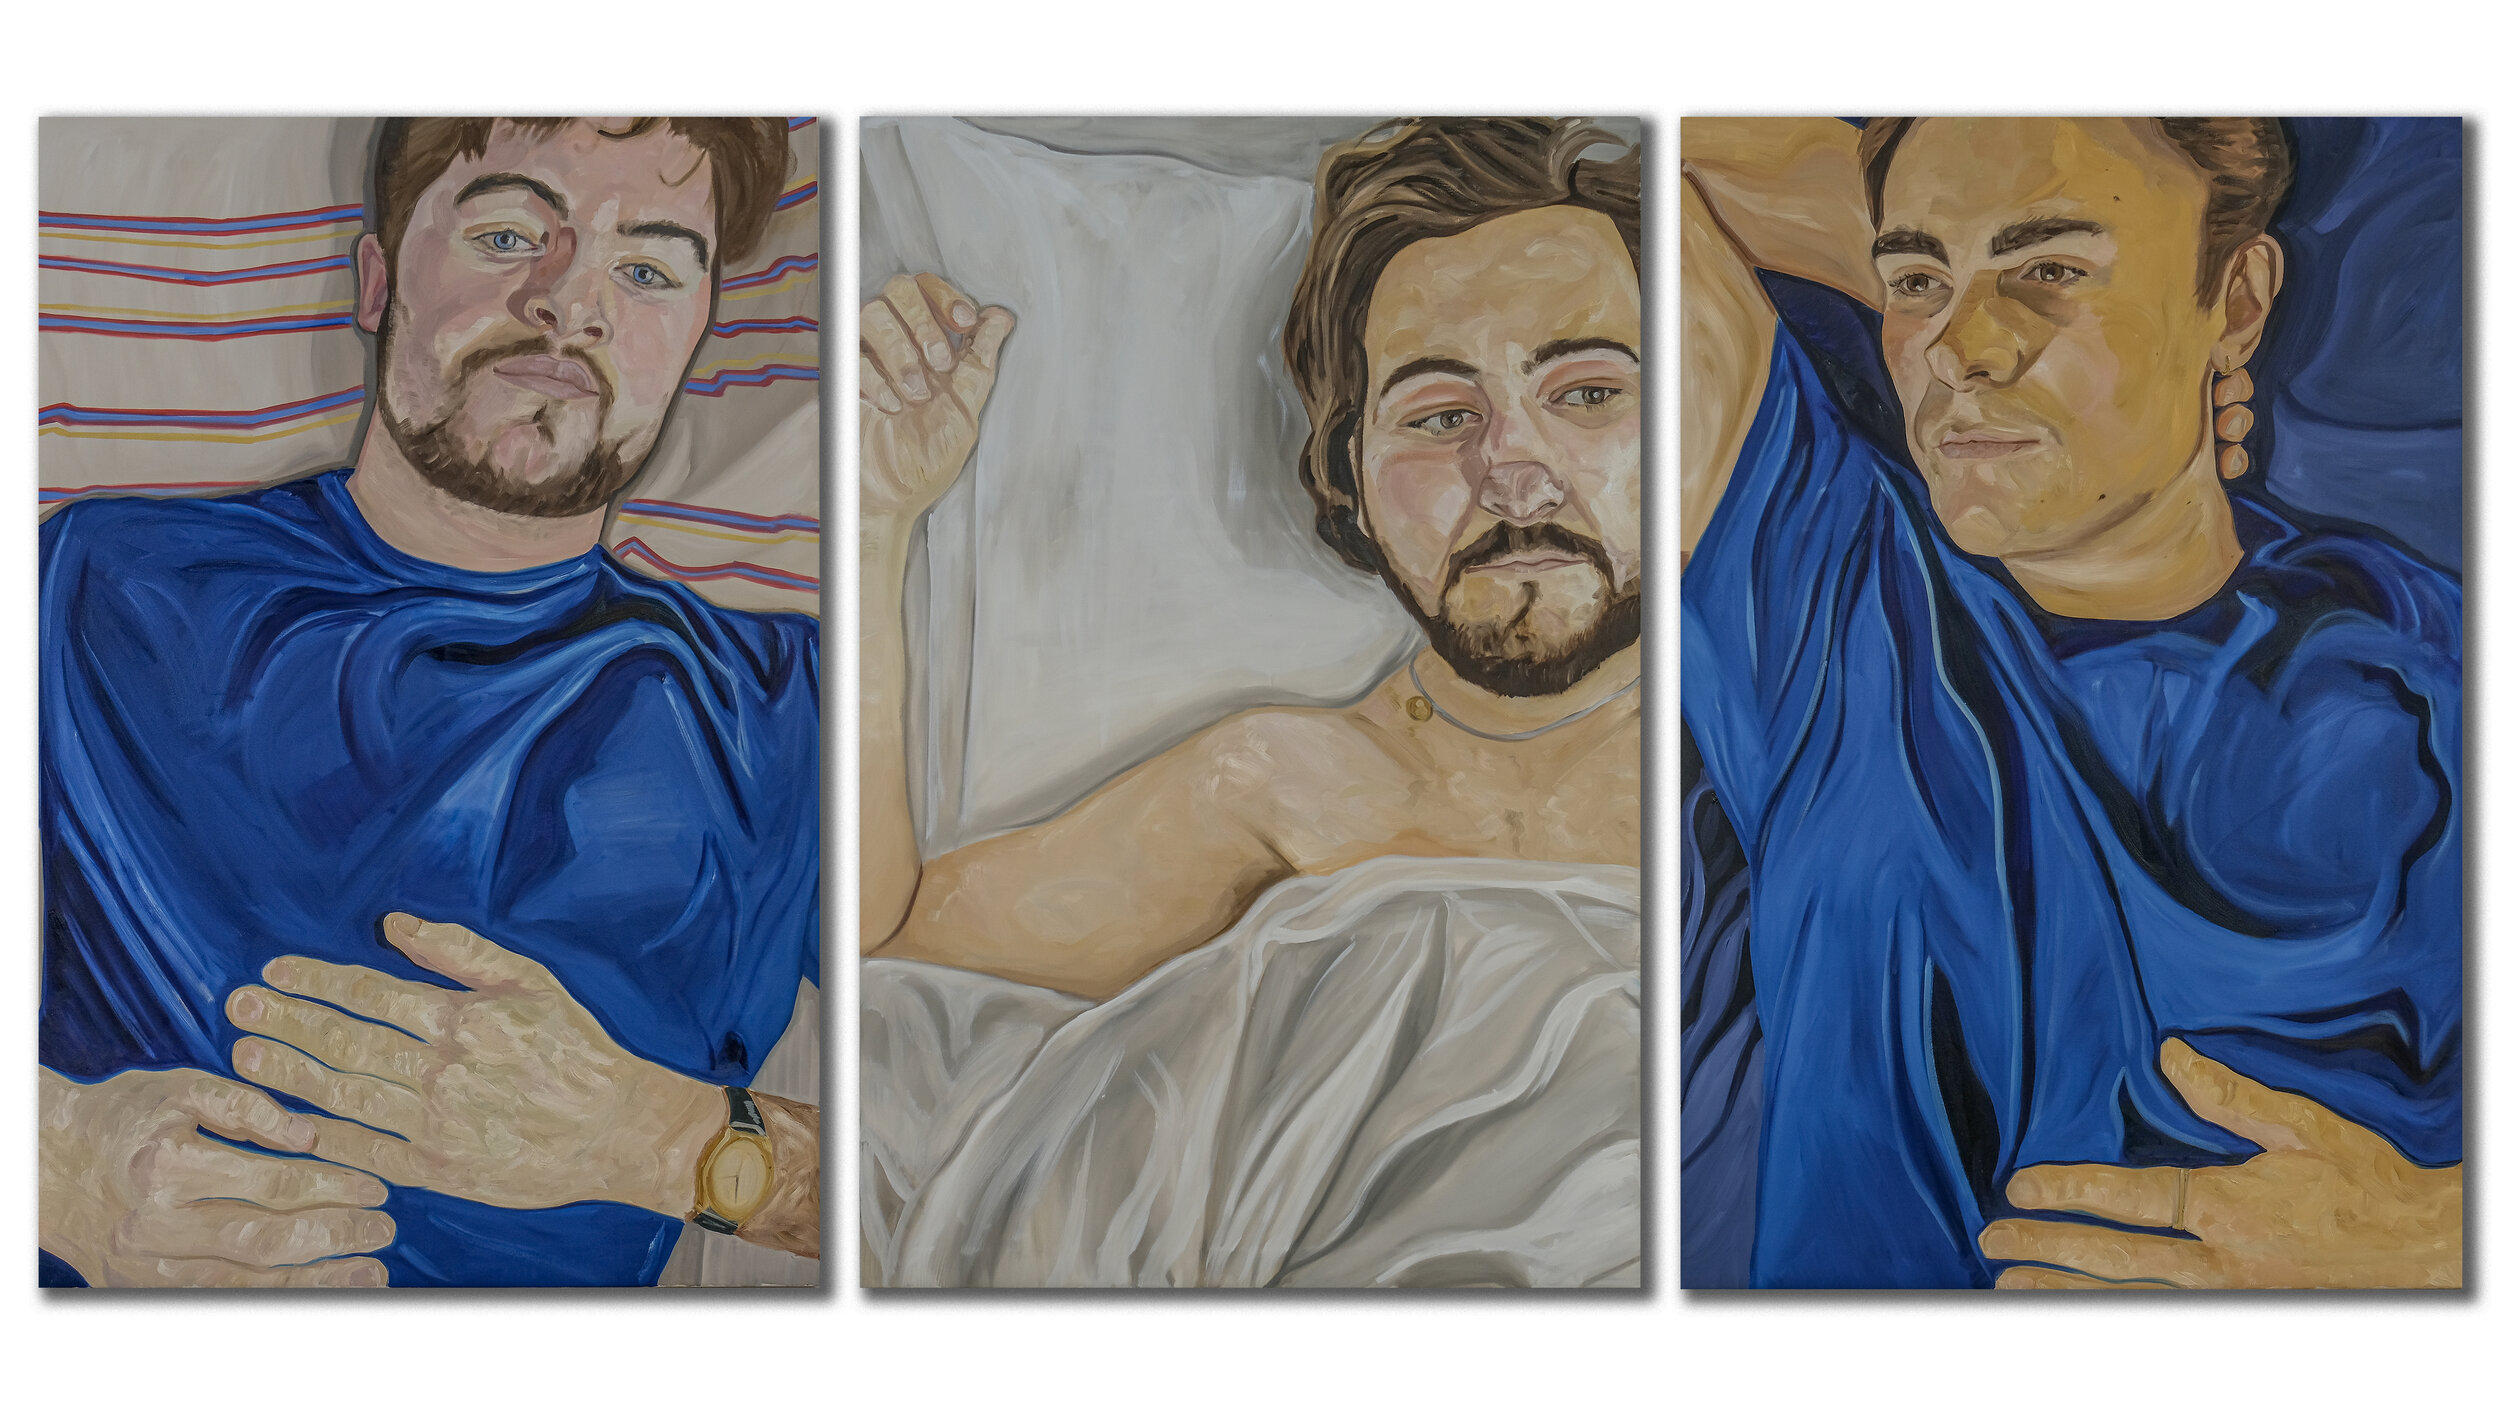   Triptych in Bed   2021  Oil on canvas  120cm x 180cm each 